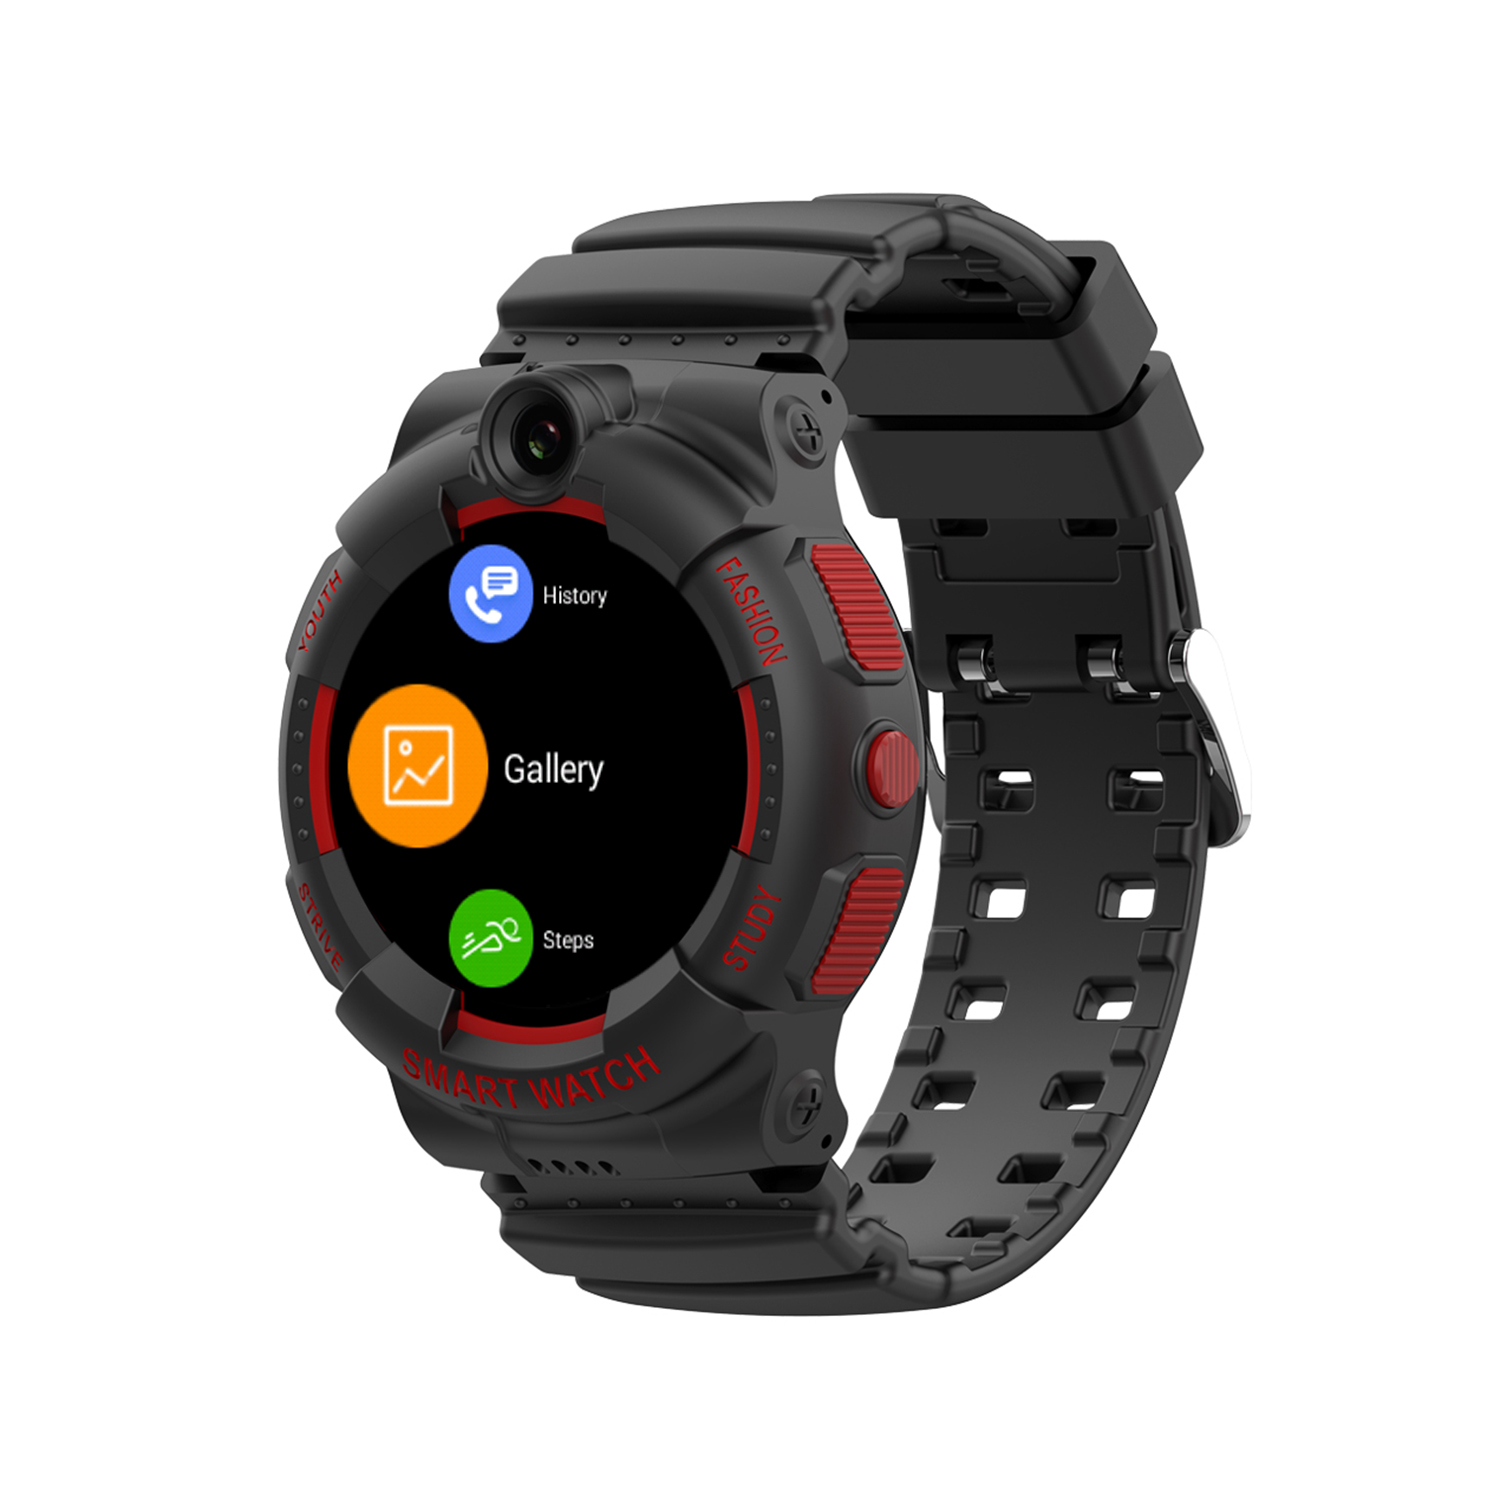 4G IP67 Waterproof Accurate Location Smart Safety GPS Tracker Watch for Kids with Real-Time Global Free video Call D48P